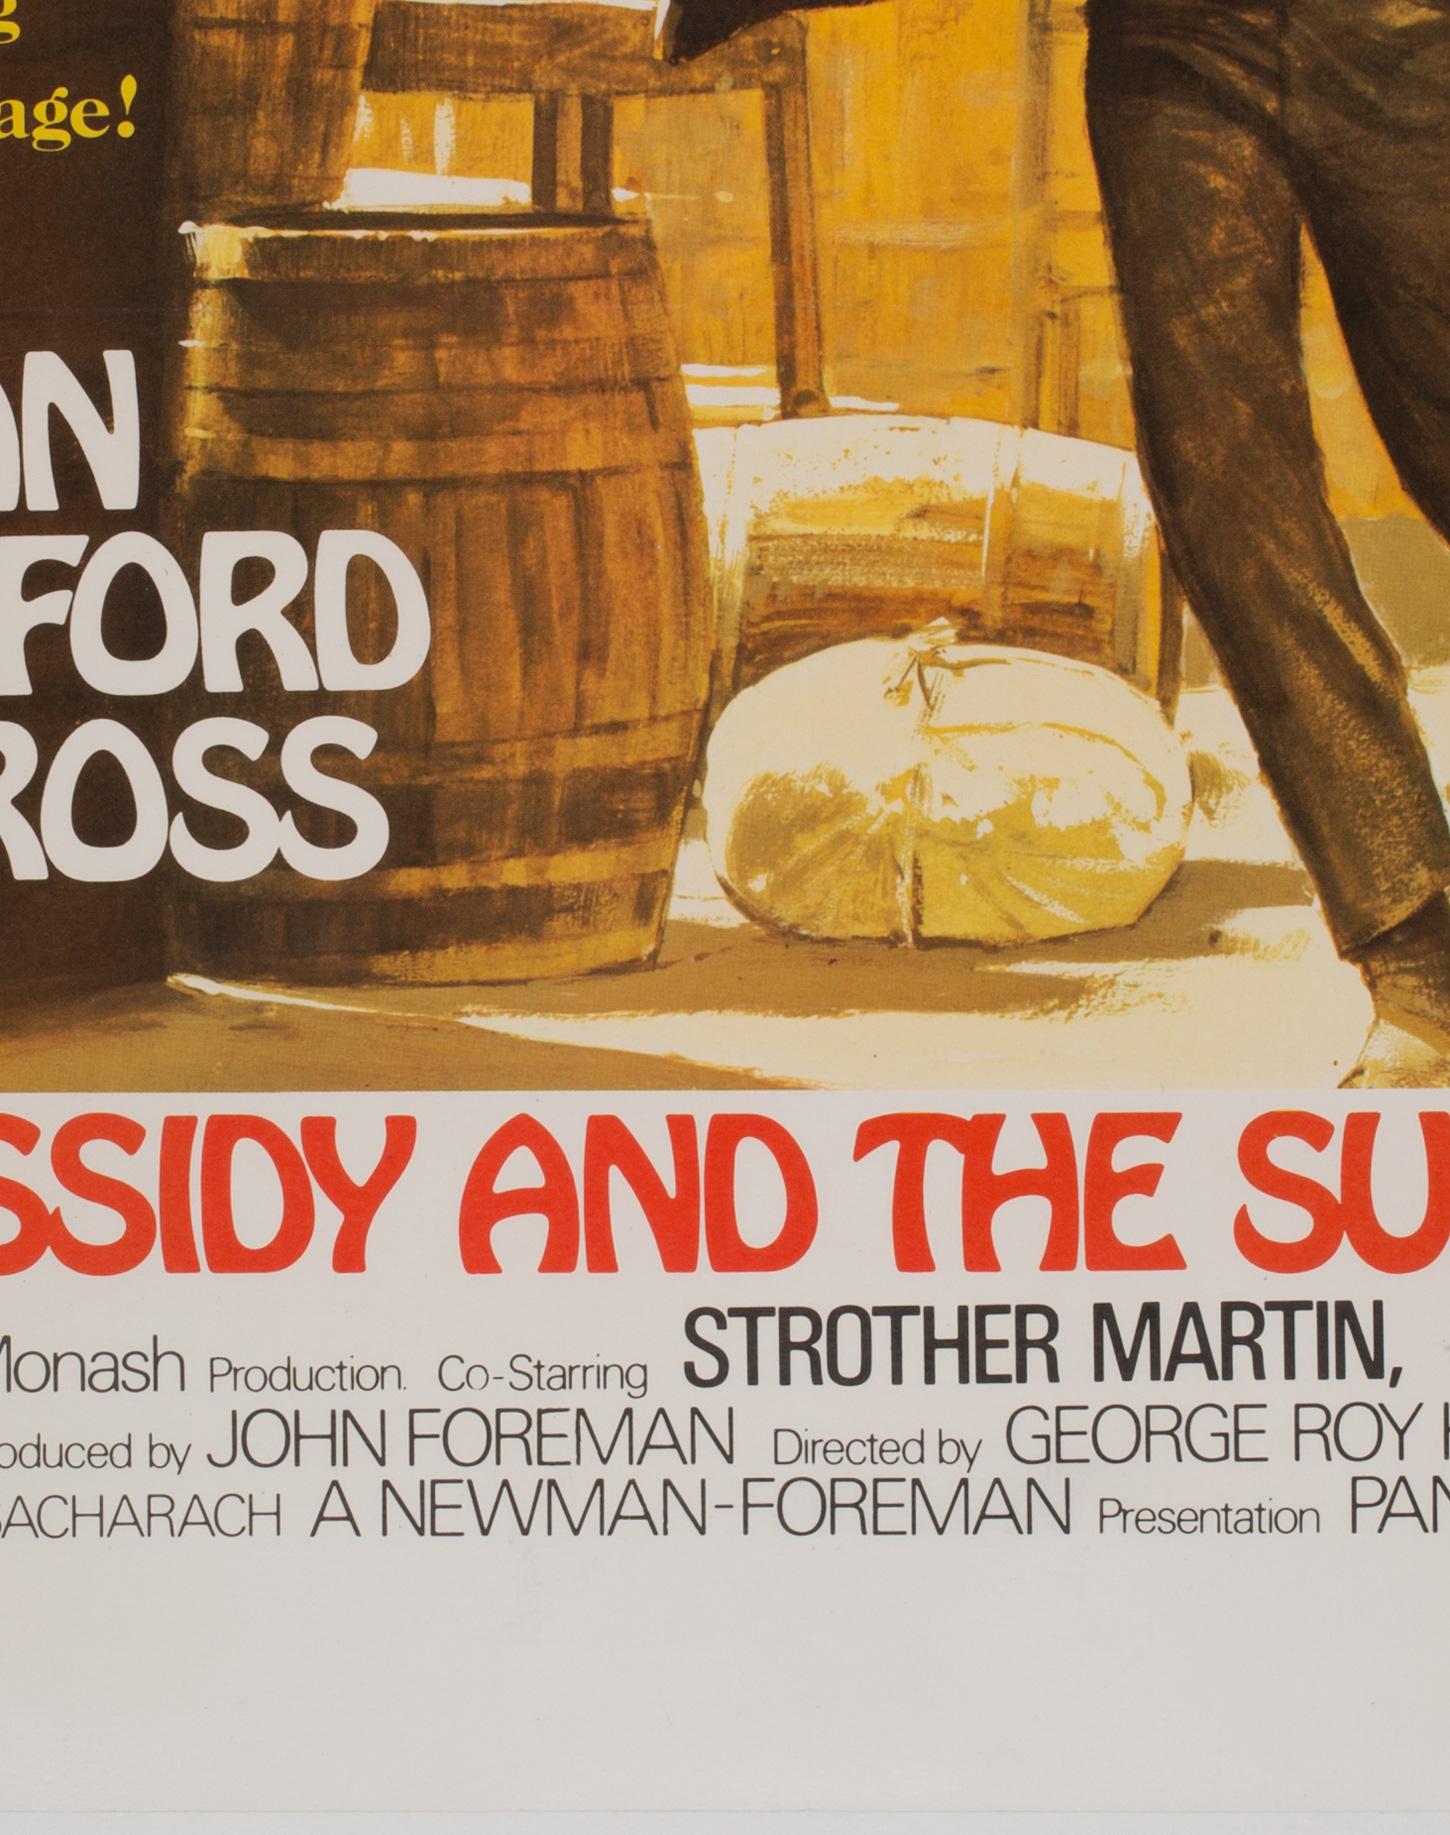 The UK Quad for the much loved classic film Butch Cassidy and the Sundance Kid features some of the strongest artwork for the title.

In fantastic, unrestored condition. The vintage movie poster is in excellent/near mint condition, very light